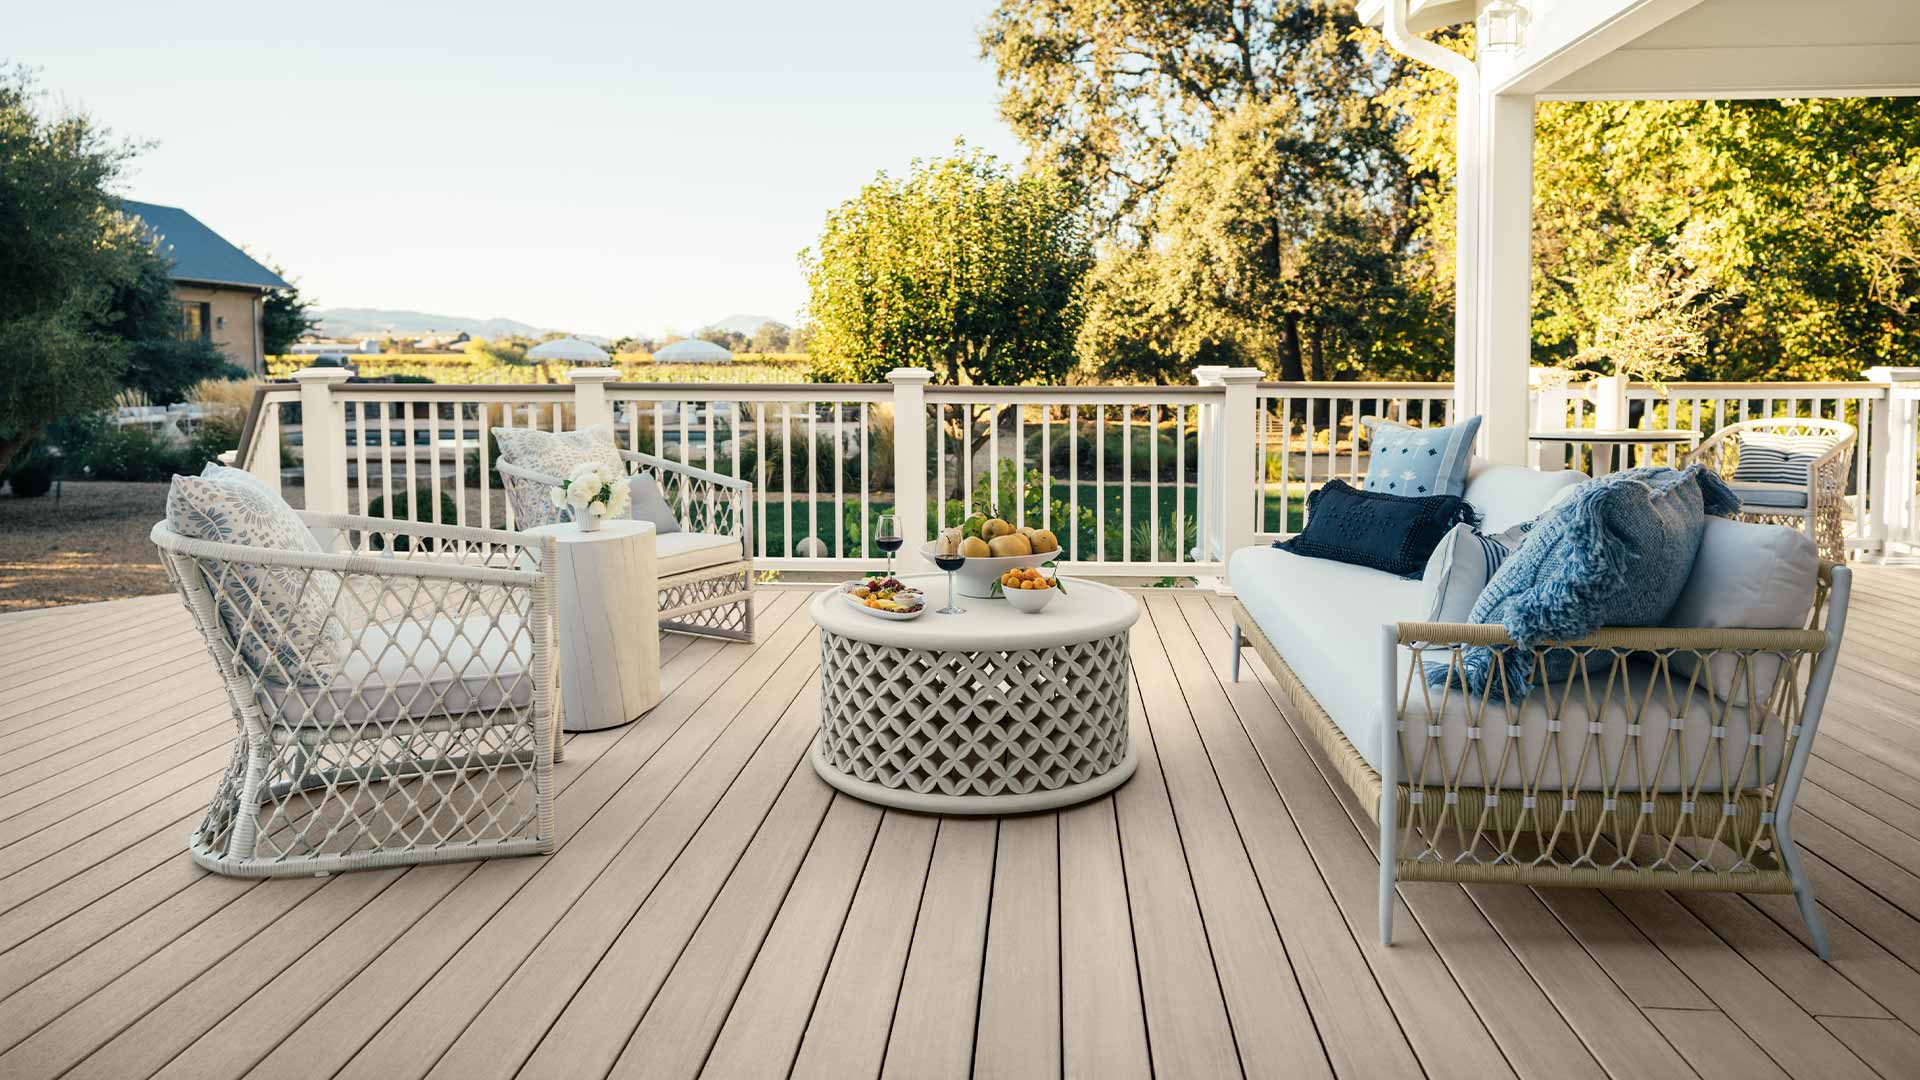 Vineyard outdoor space on light tan deck with outdoor furniture and charcuterie